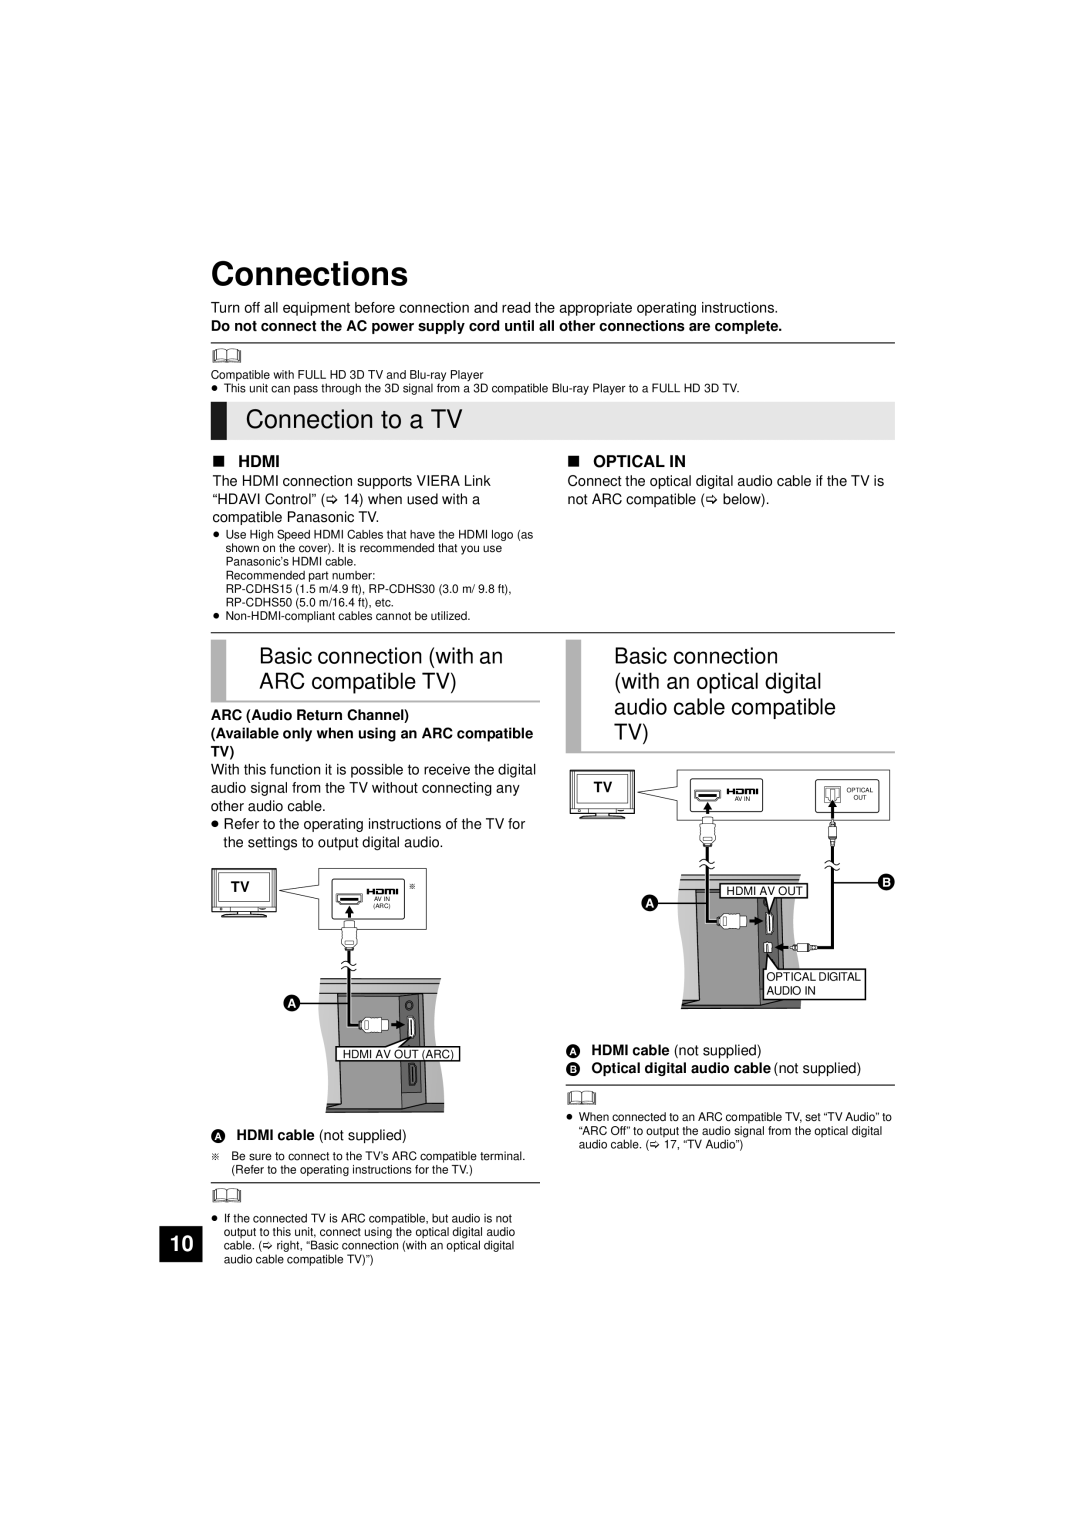 Panasonic SC-HTB10 Connections, Connection to a TV, Basic connection with an ARC compatible TV, Hdmi, Optical In 